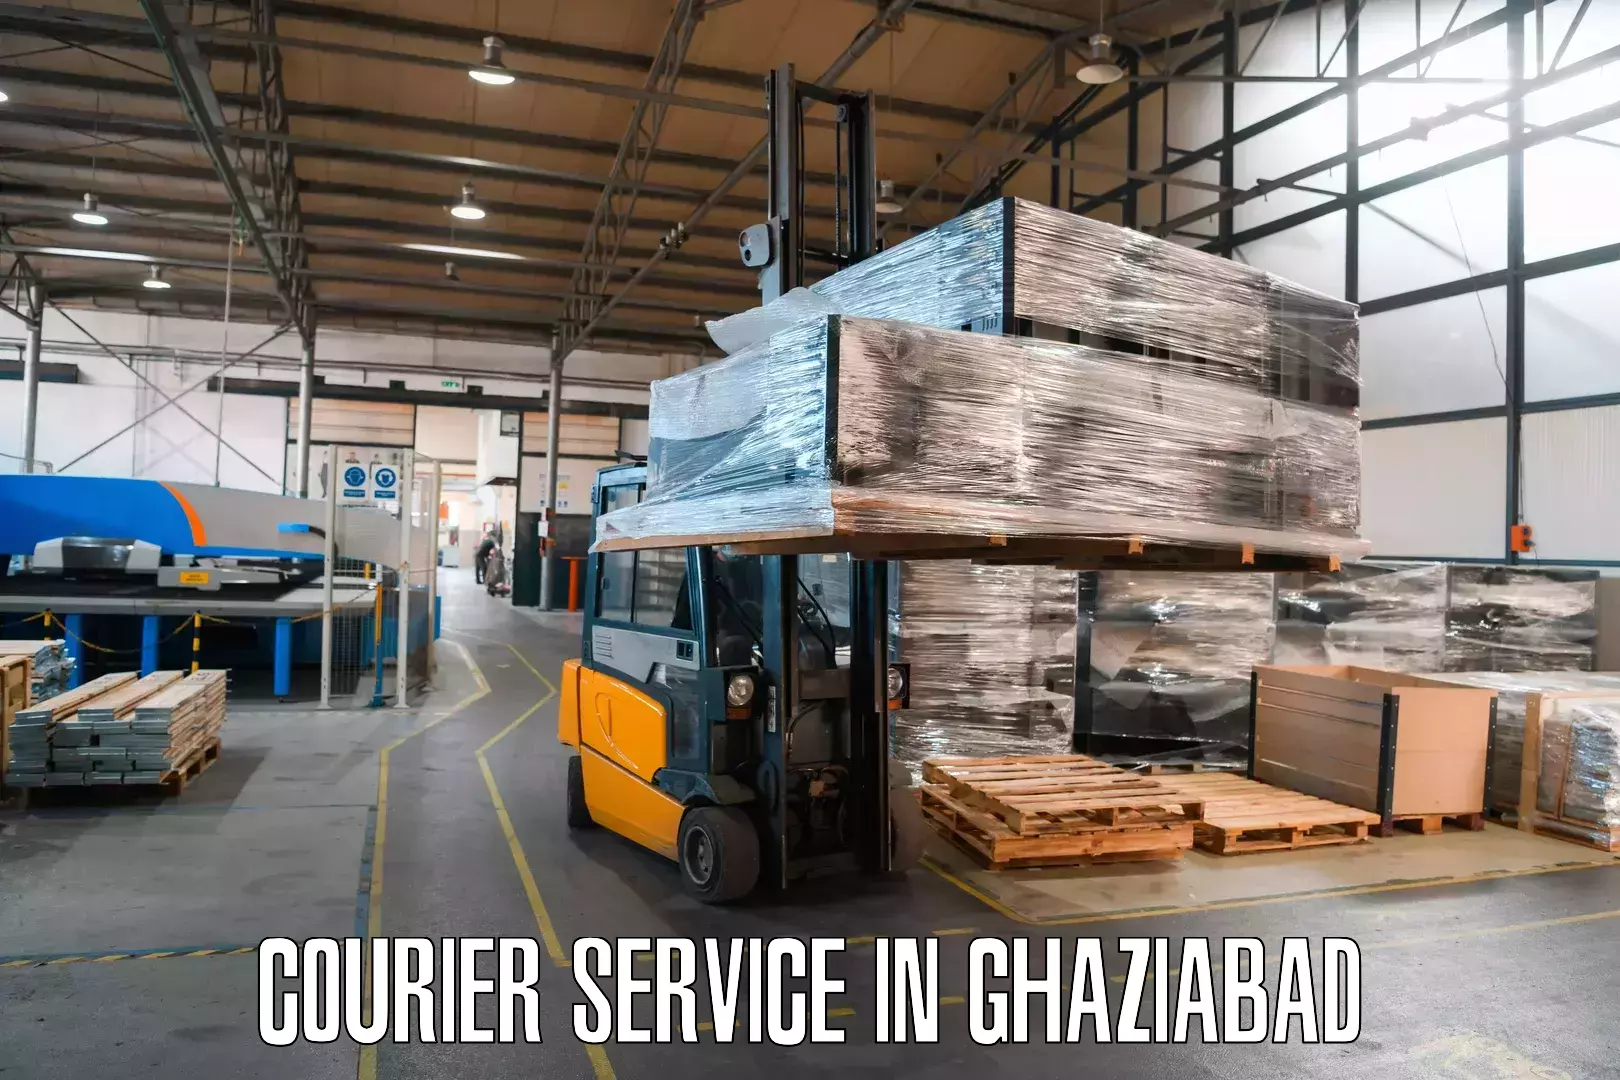 Express logistics providers in Ghaziabad